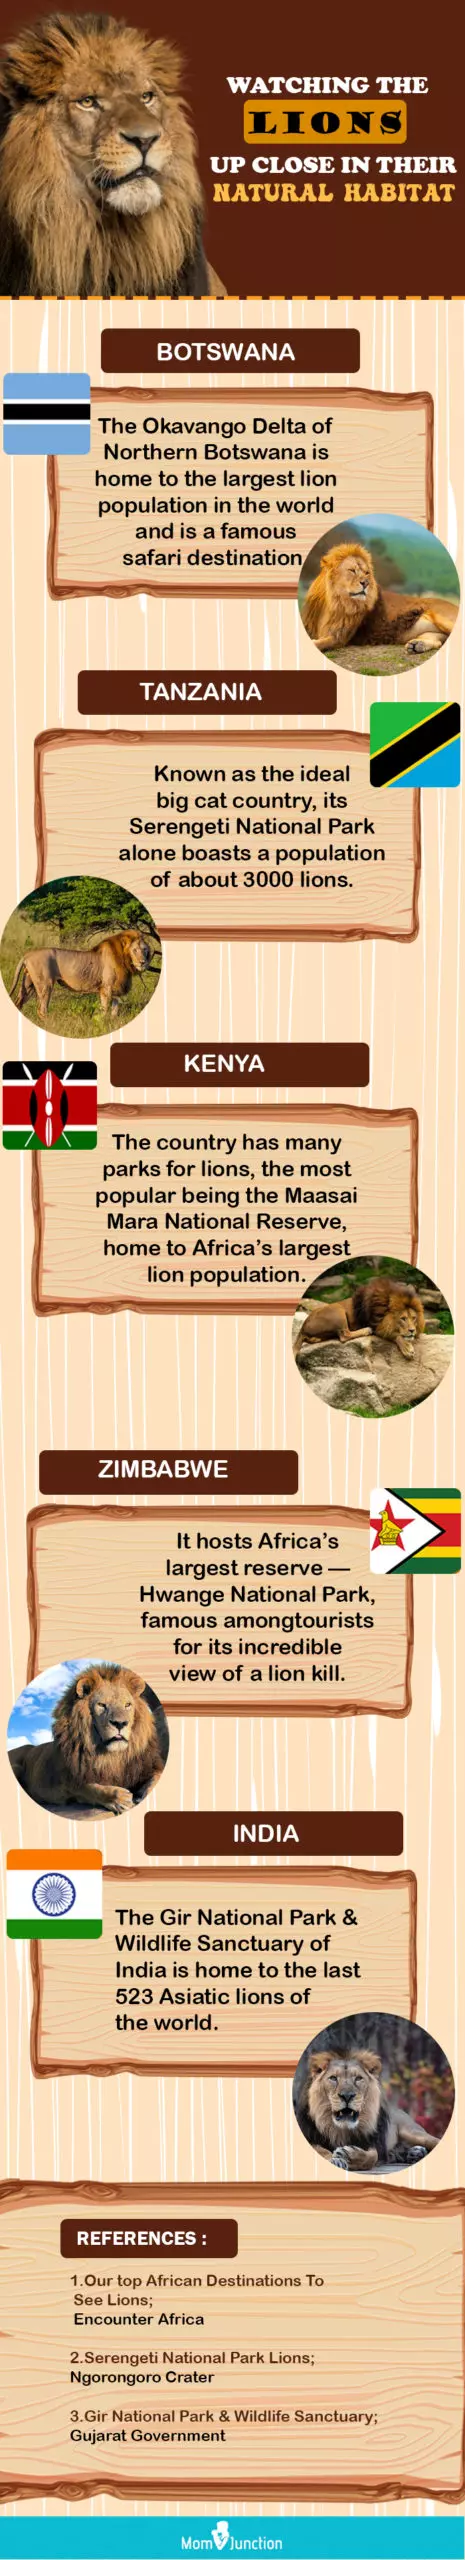 lion reserves across the world (infographic)